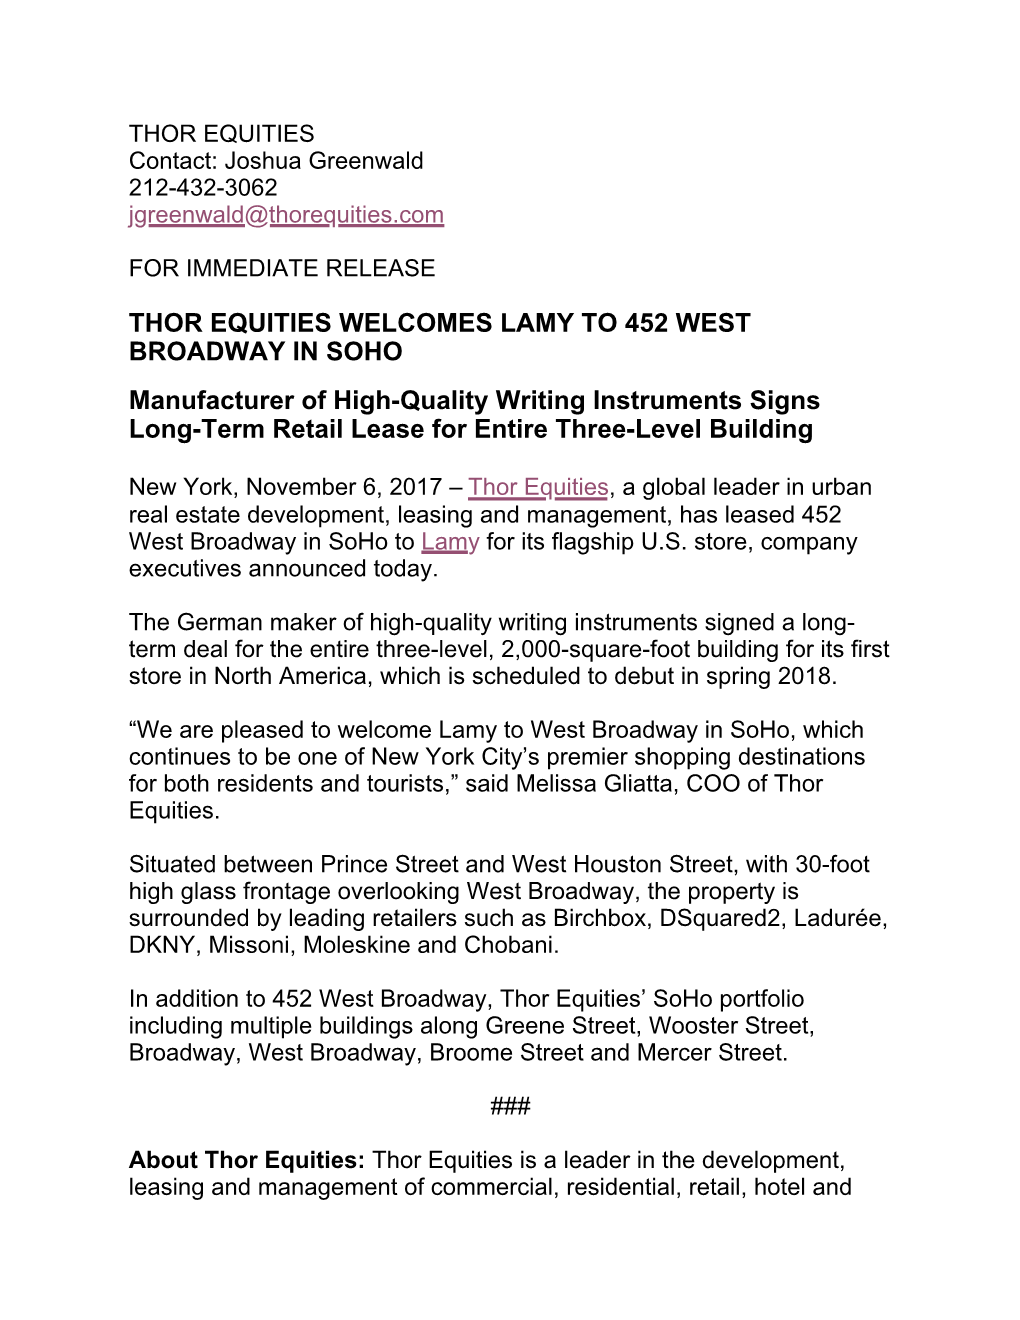 Thor Equities Welcomes Lamy to 452 West Broadway in Soho